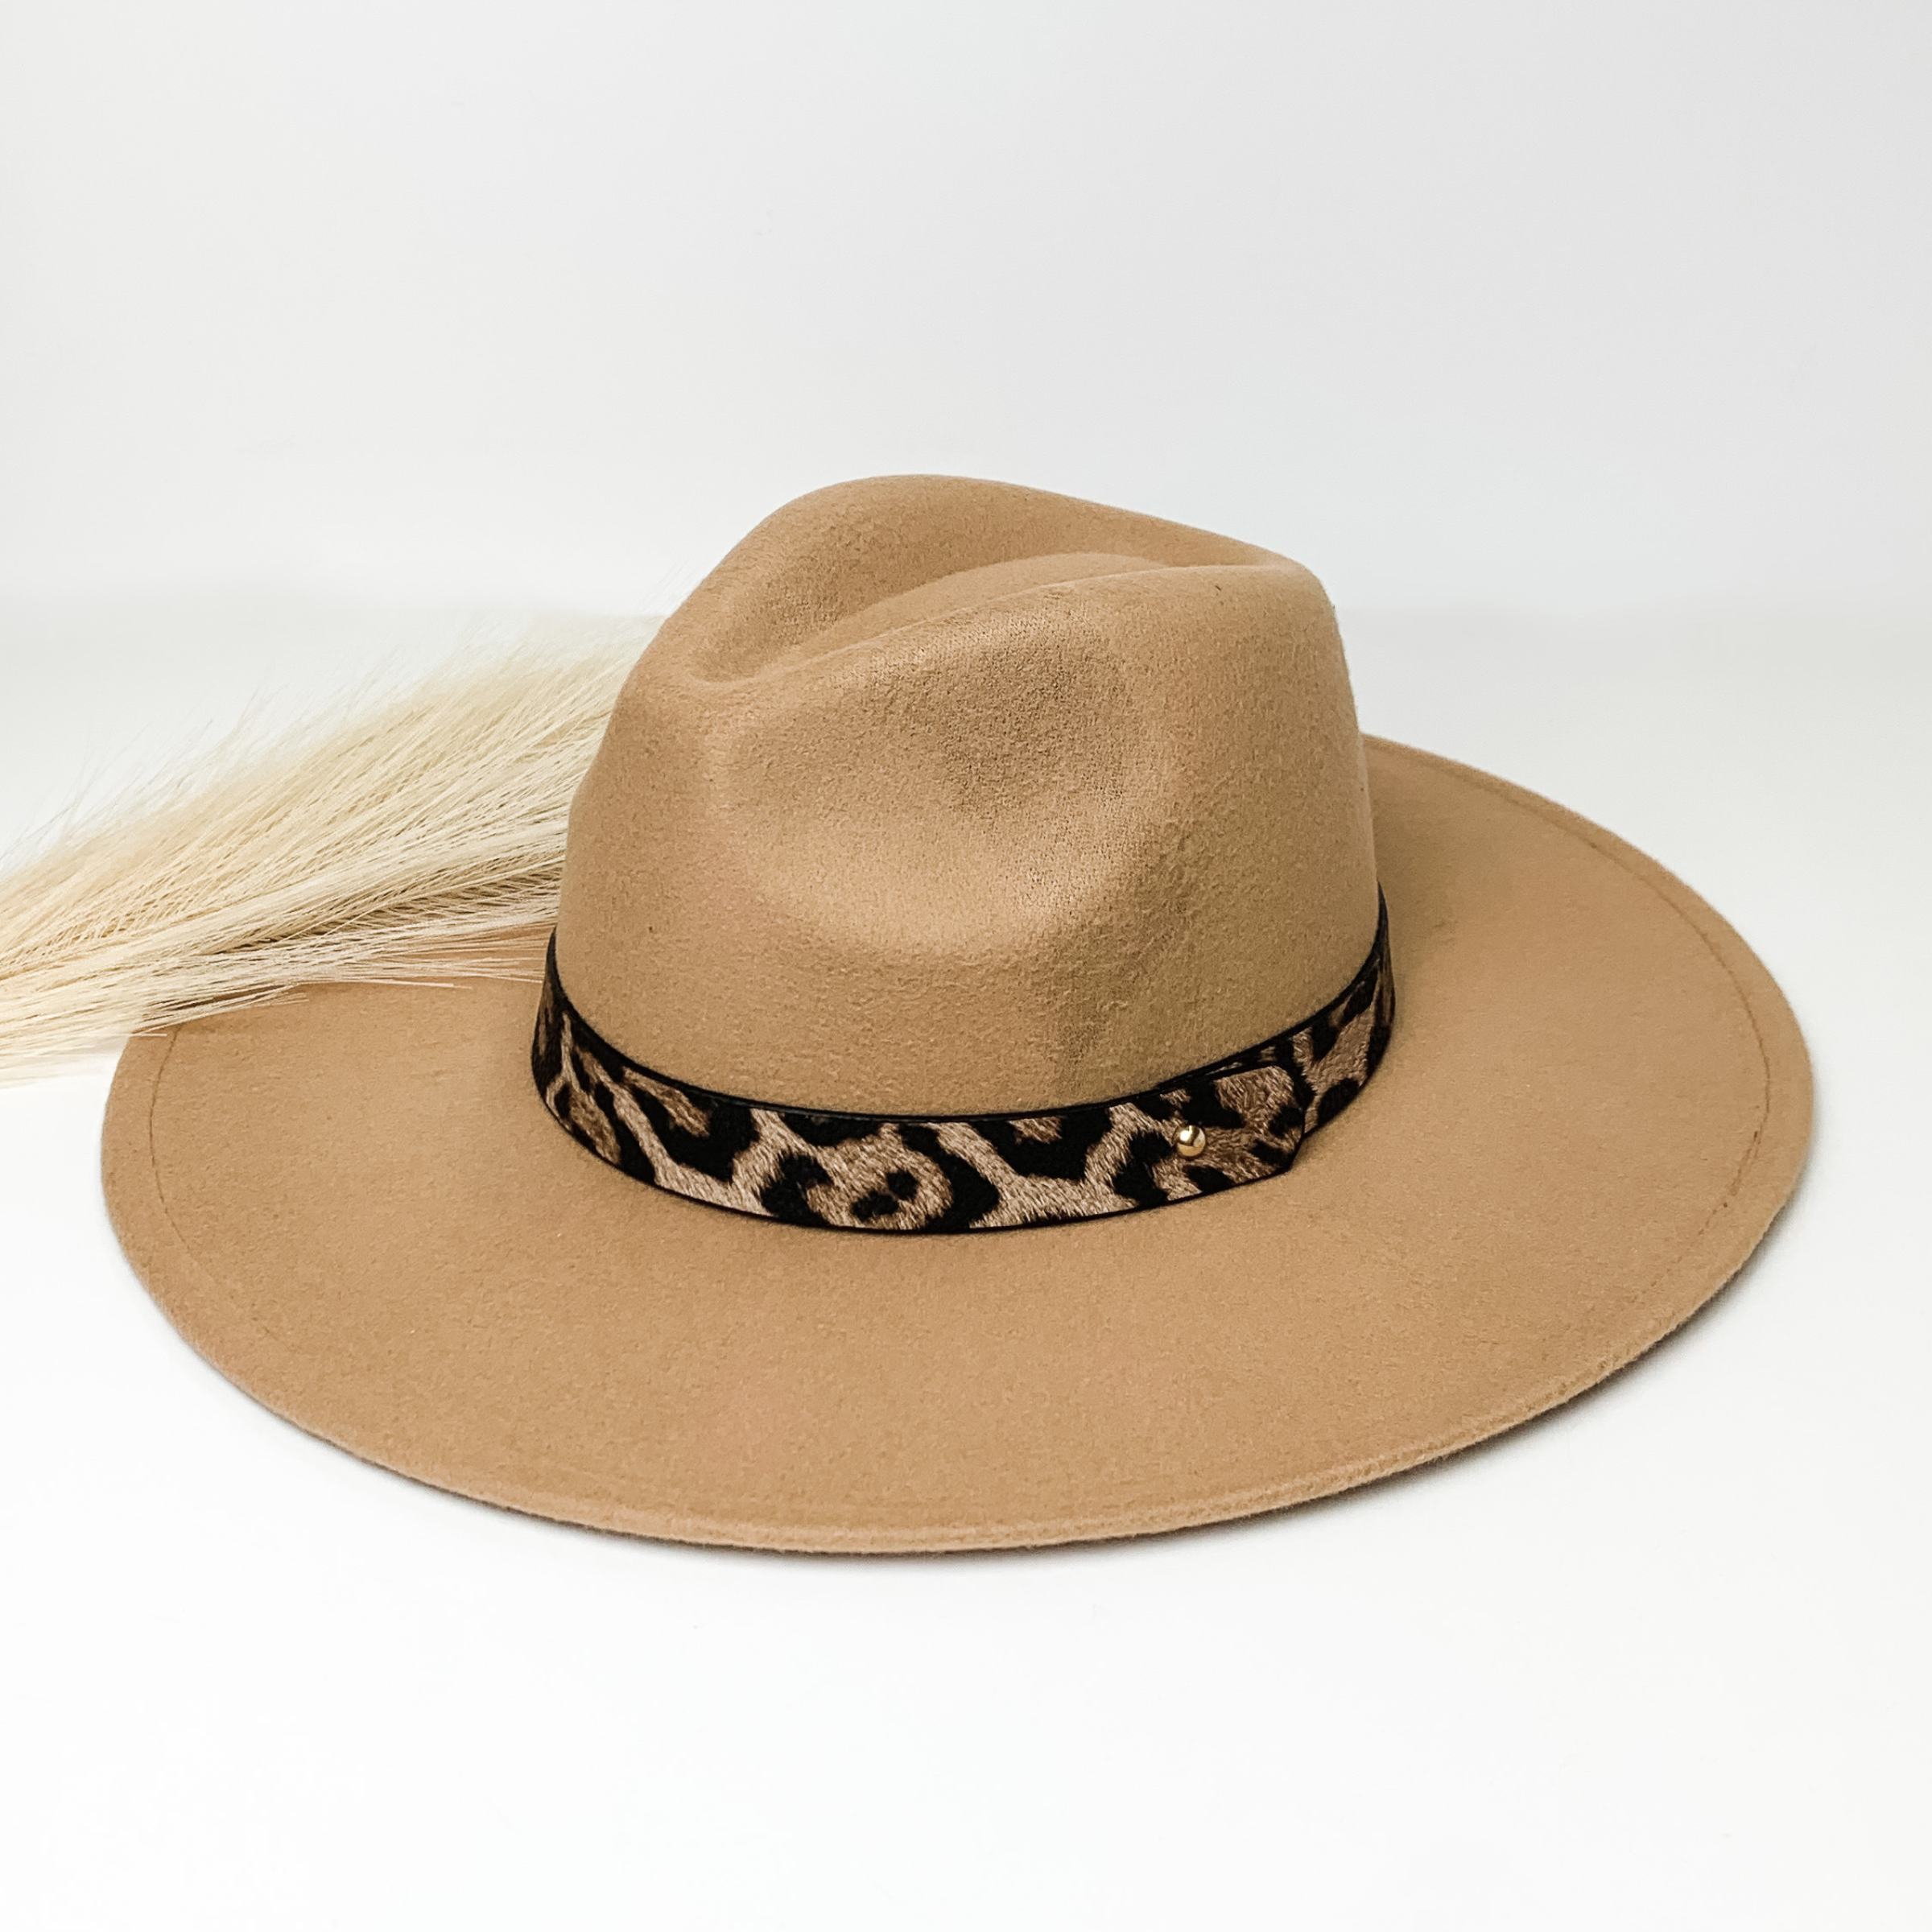 Taupe flat brim hat with a leopard print hat bad around the crown. This hat is pictured on a white background with ivory pompous grass laying partially on the brim.  